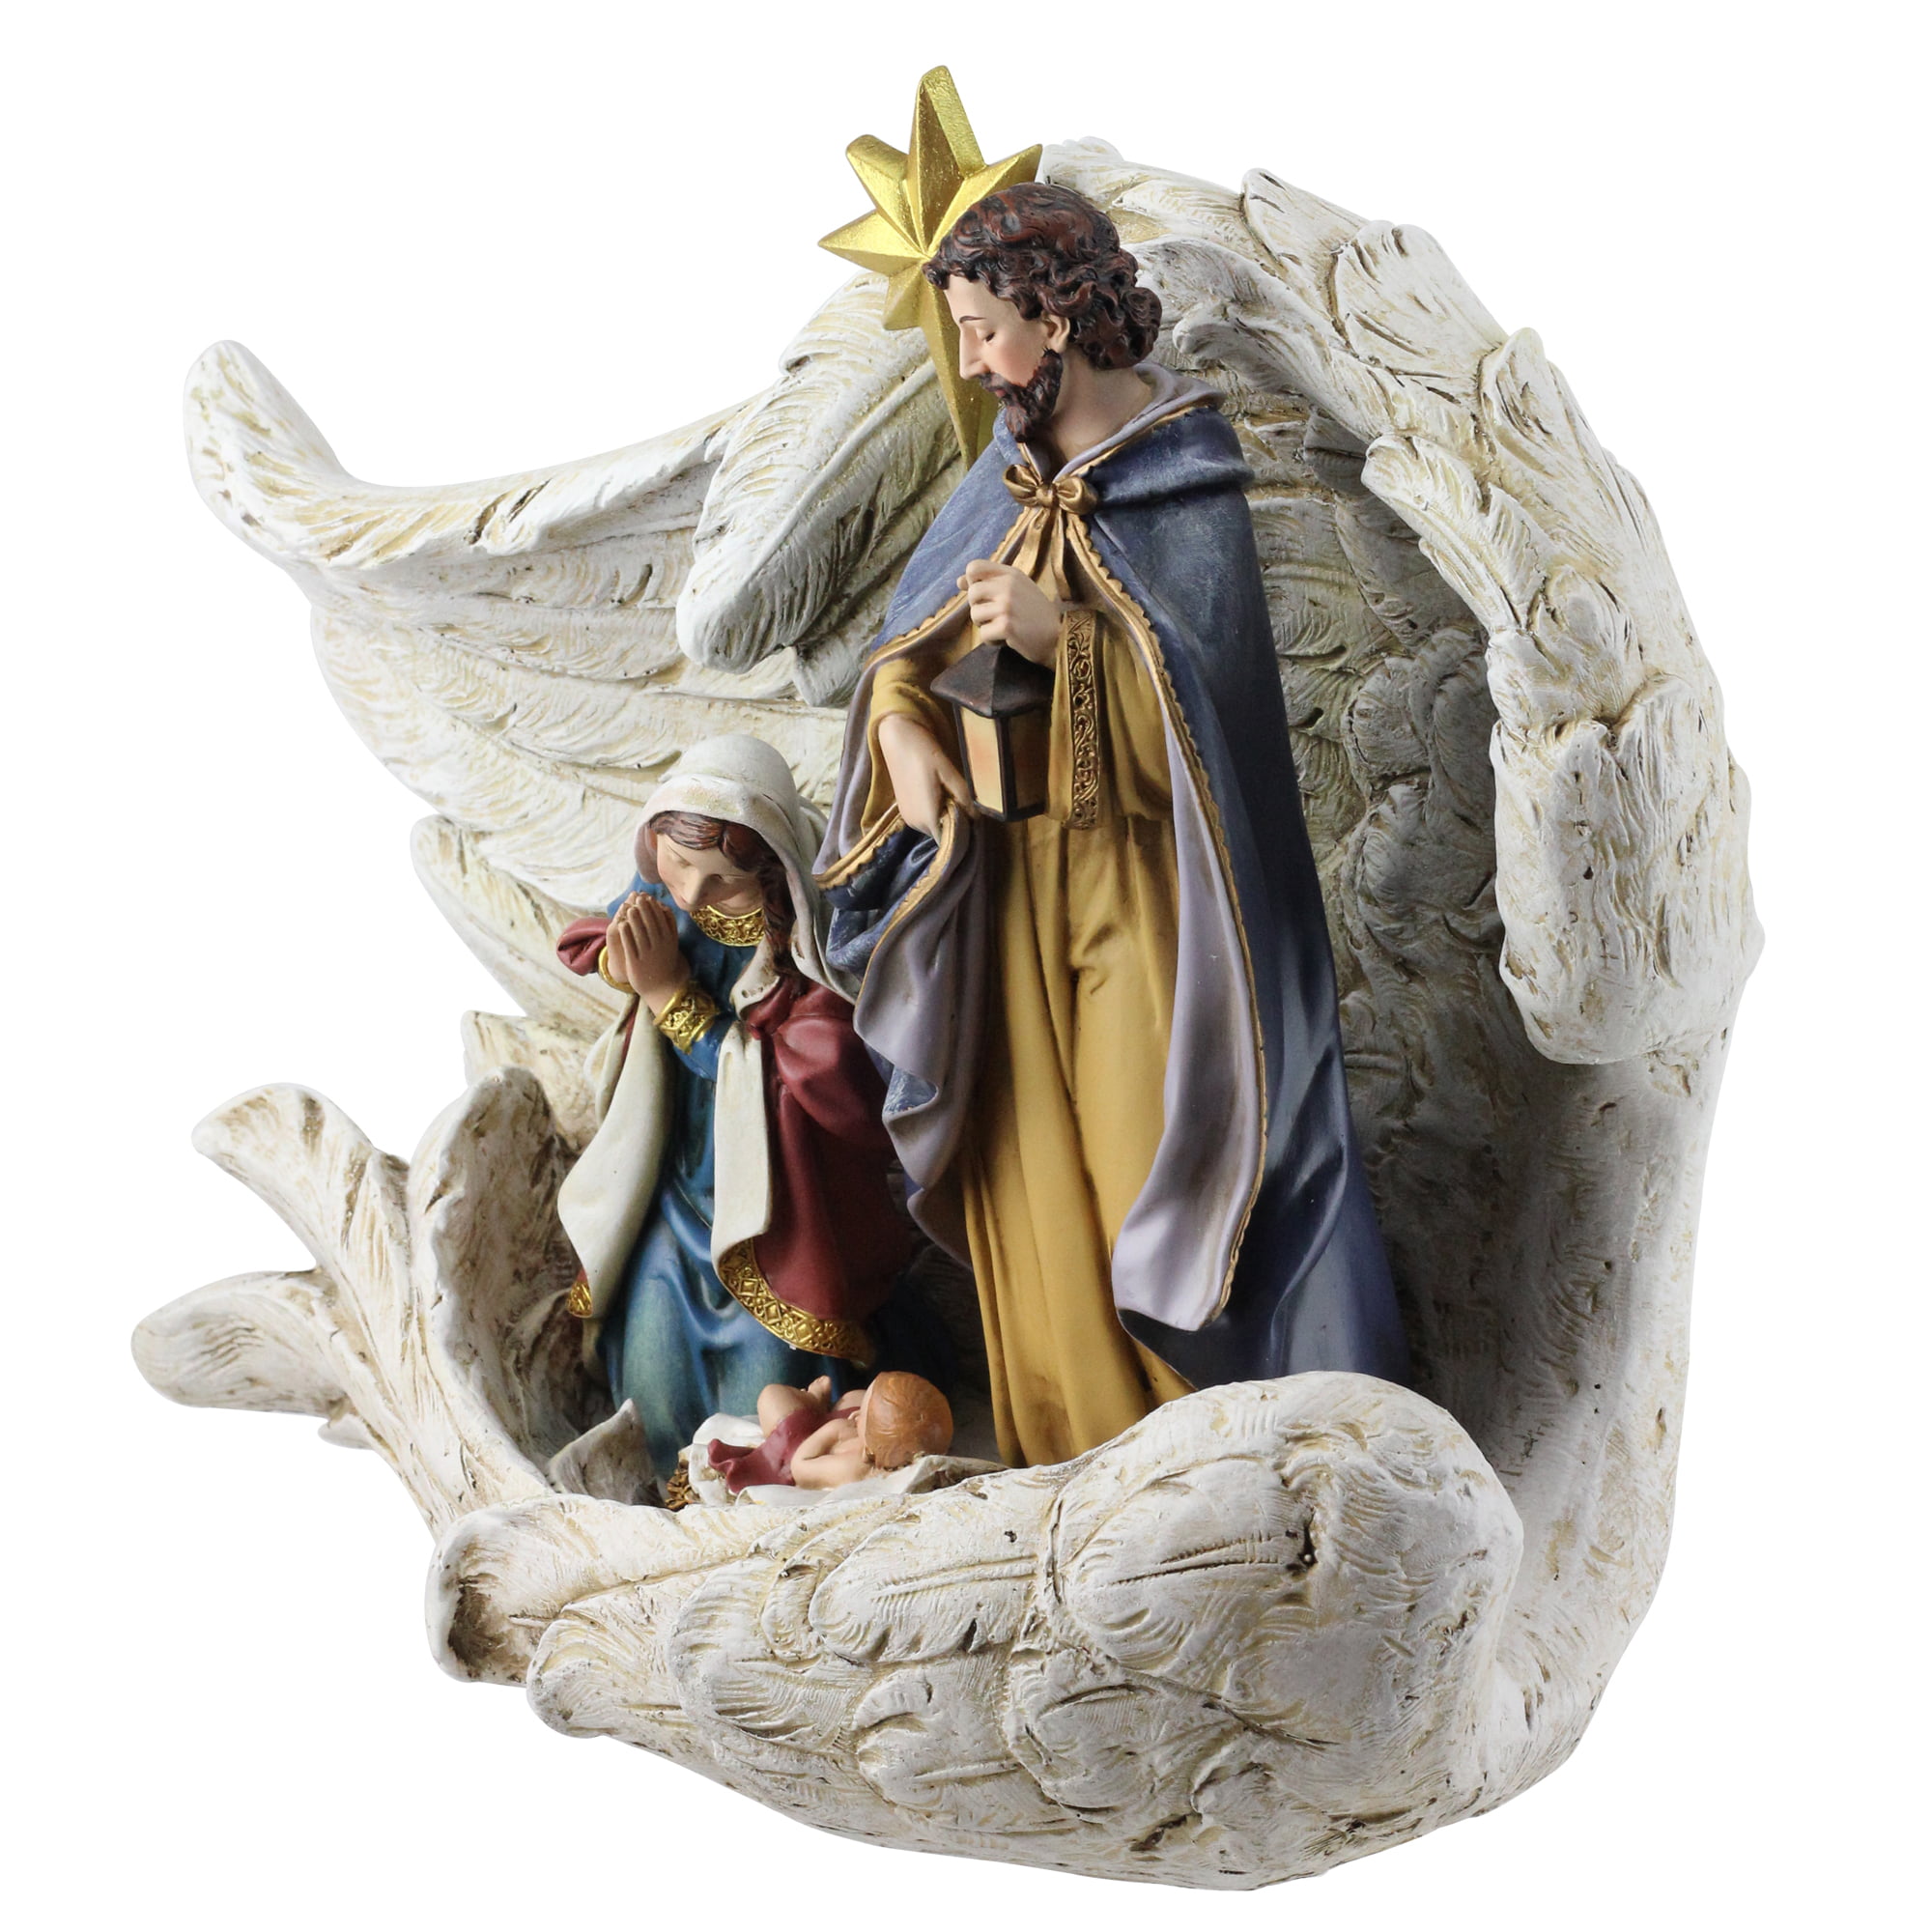 Nativity Scene Christmas Ornament Holy Family Wrapped in Angel Wings 4.5" x 3"